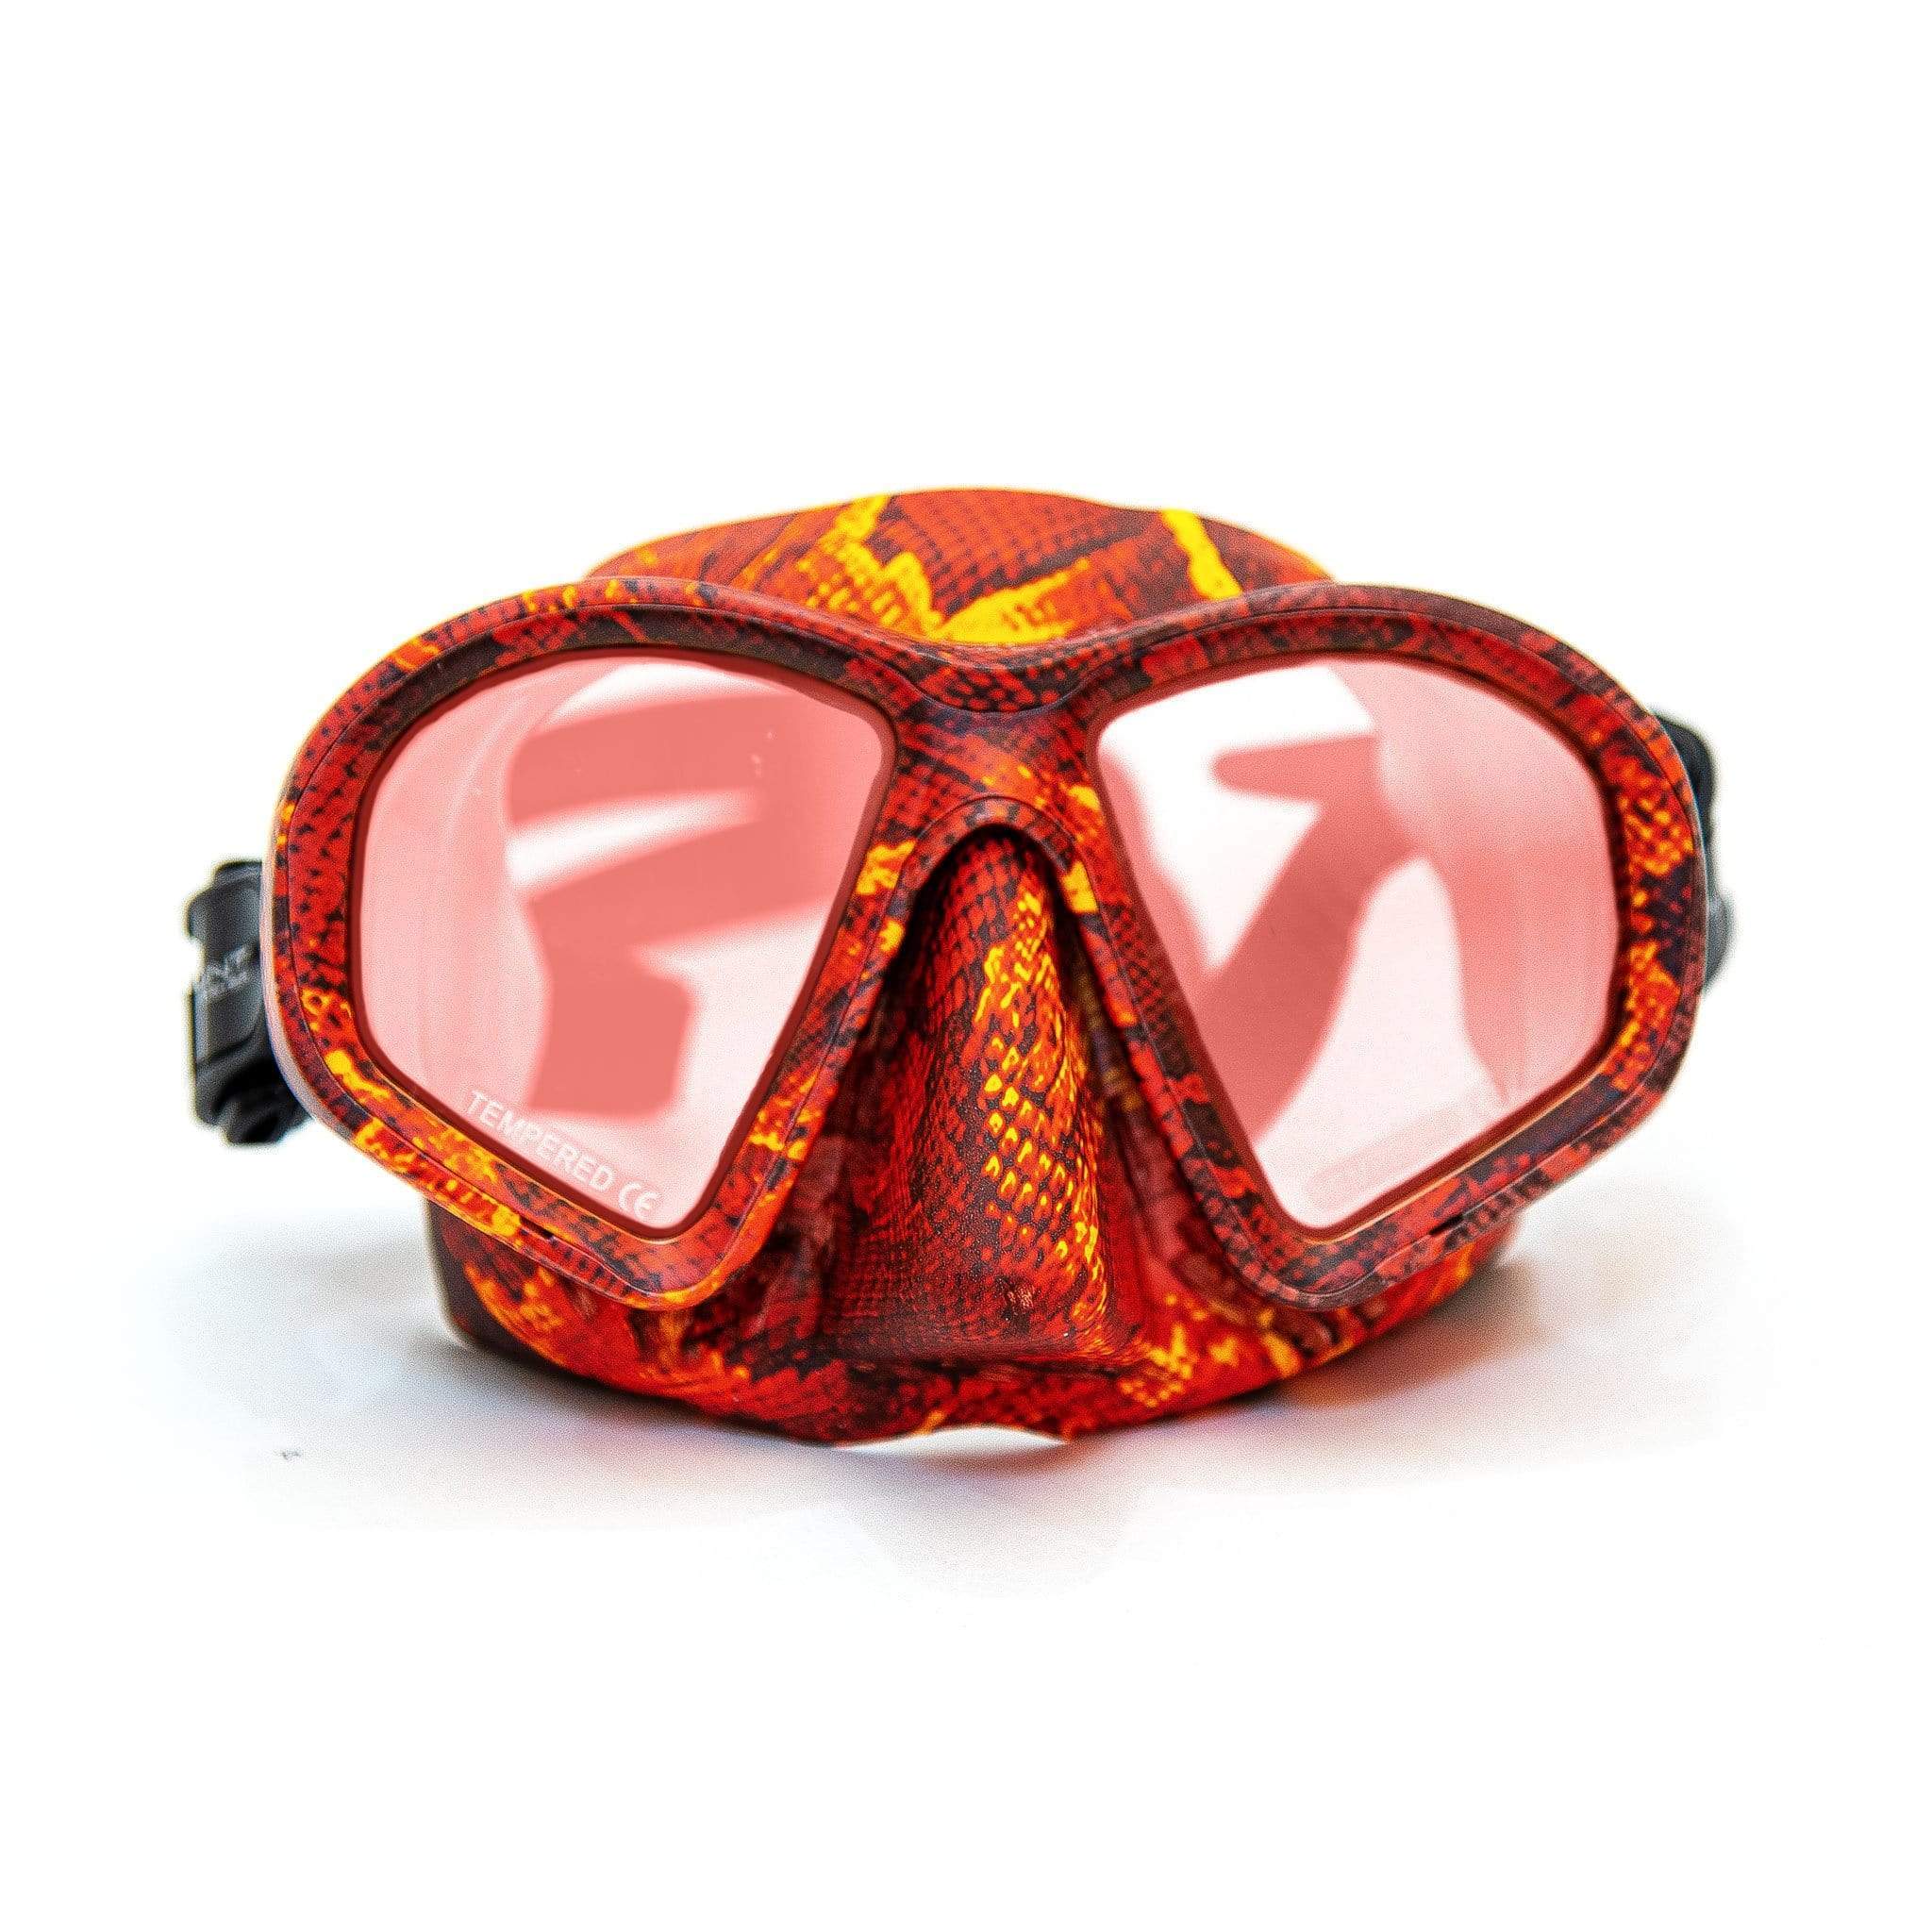 HuntMaster Red Harbinger Camo Diving Mask - With Matching Camo Container (Red)